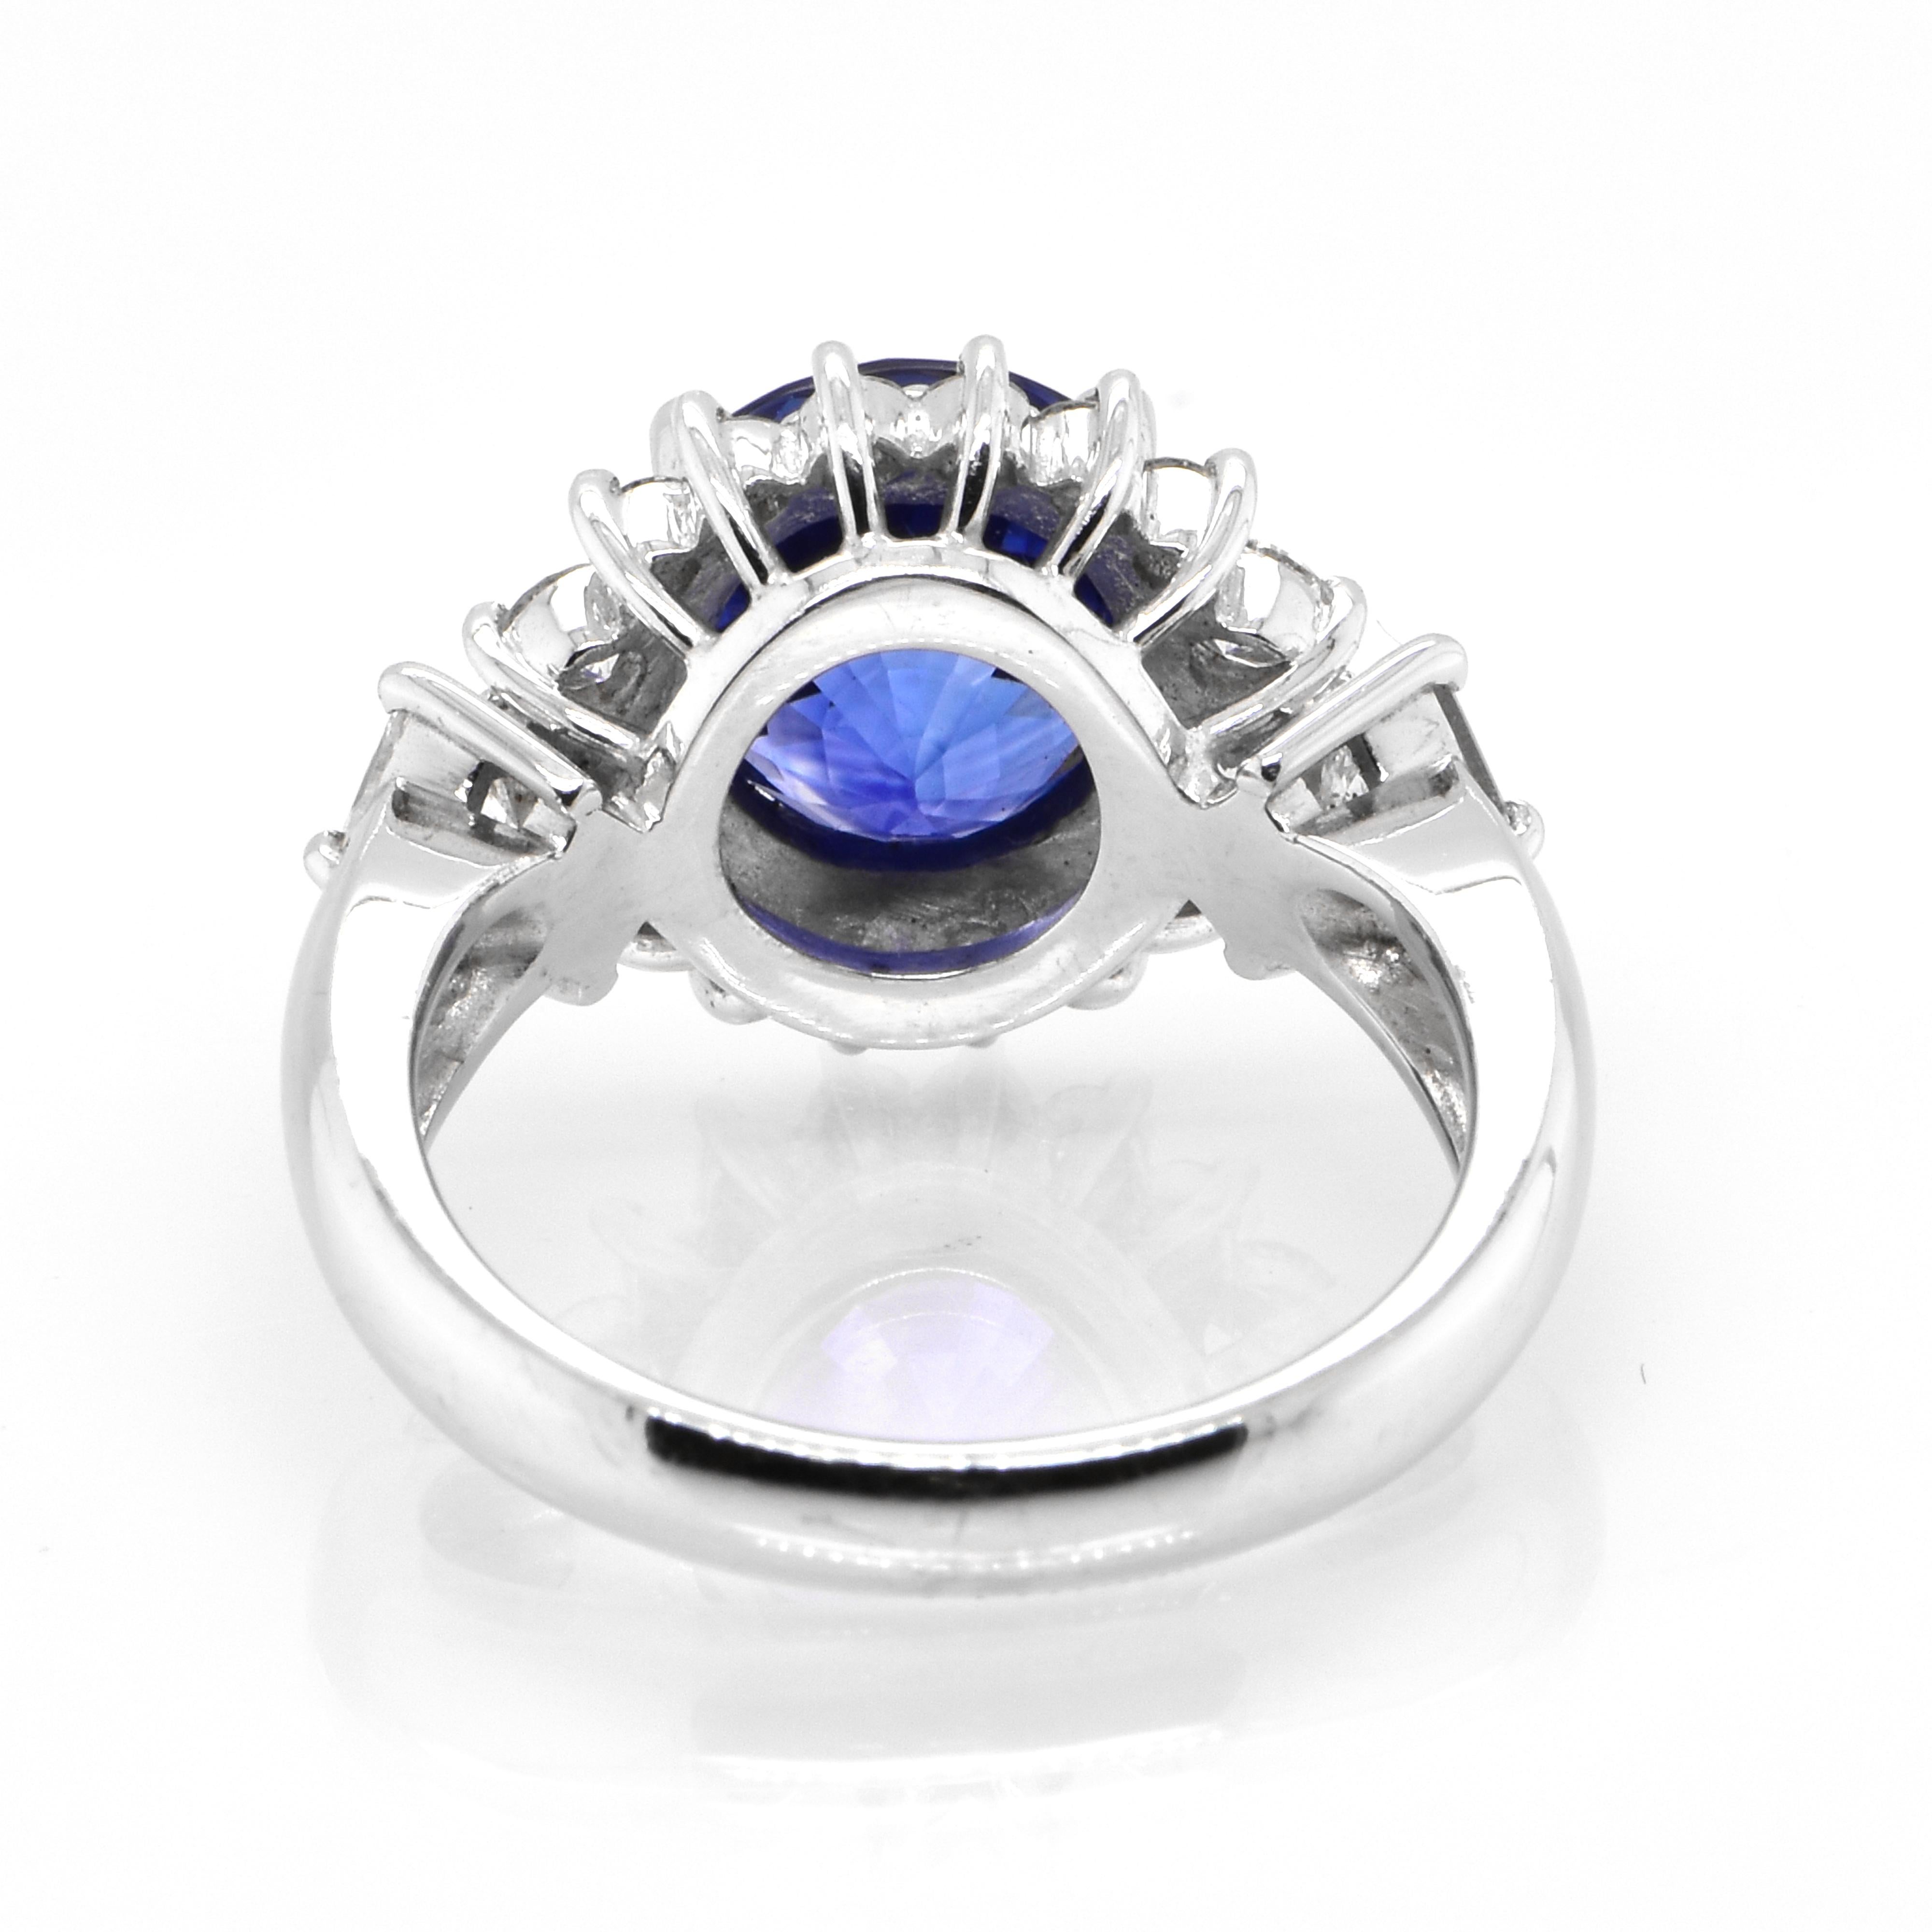 Women's 3.21 Carat Natural Royal Blue Color Sapphire and Diamond Ring Made in Platinum For Sale